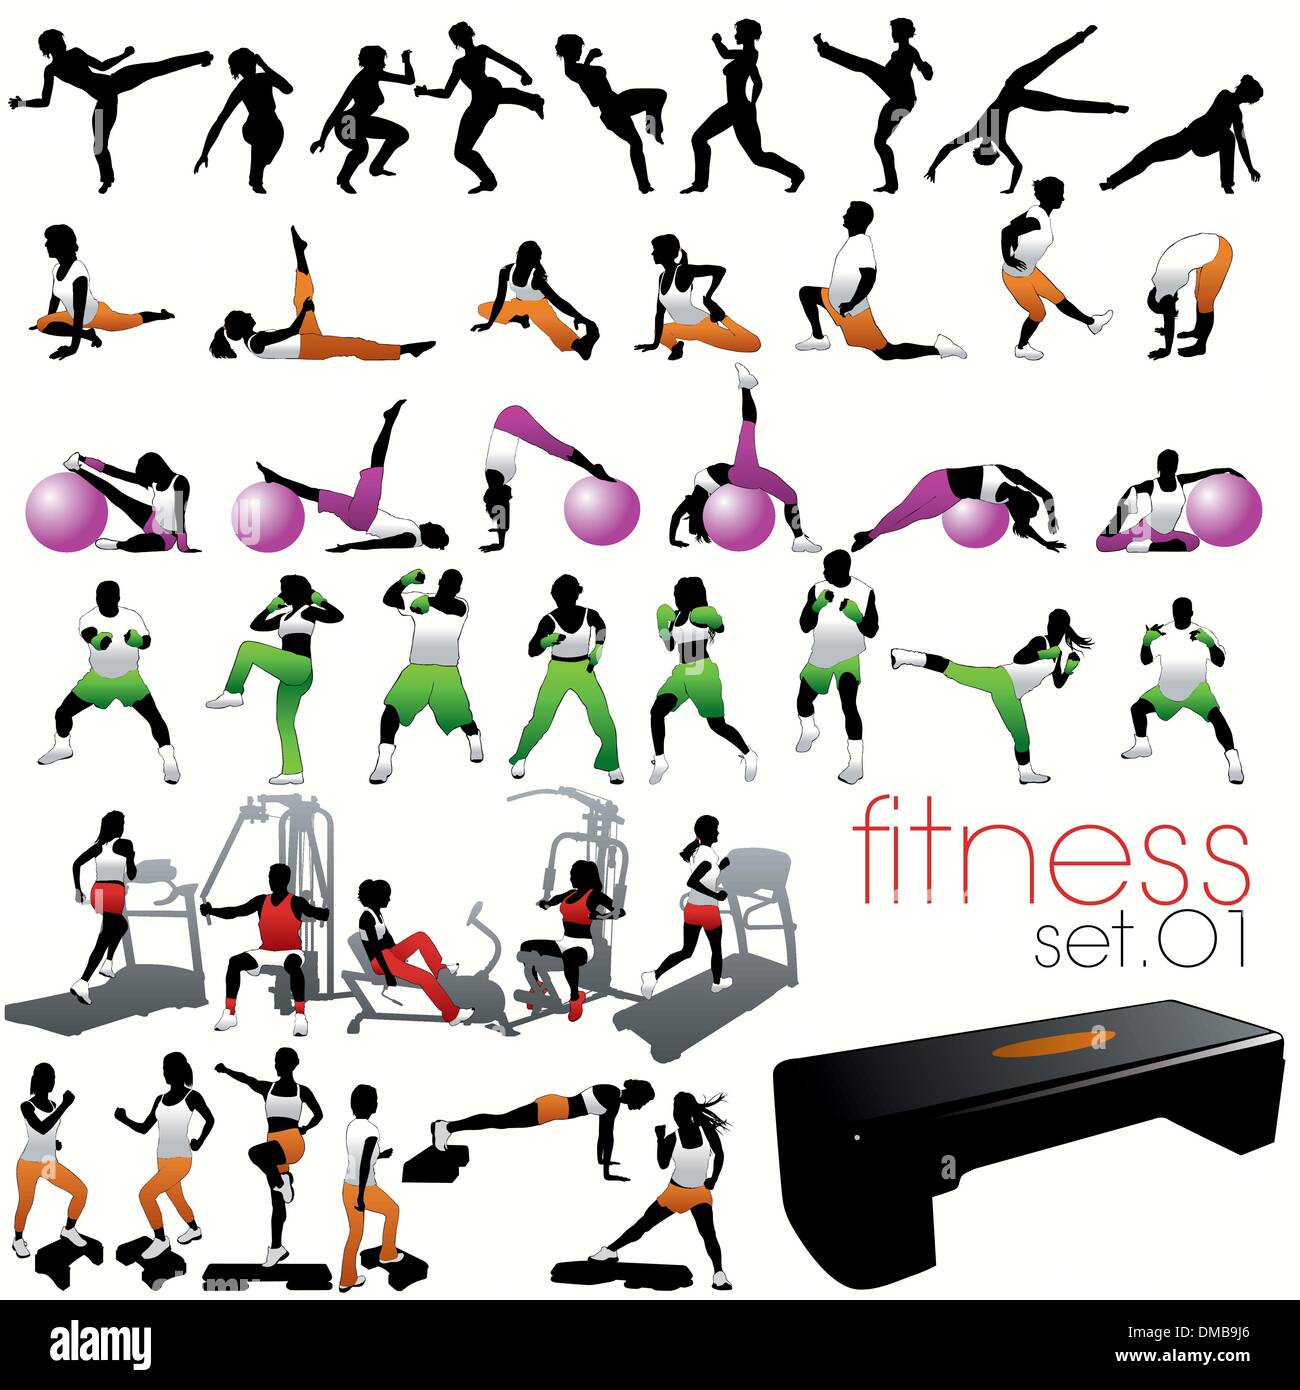 40 Fitness Silhouettes Set Stock Vector